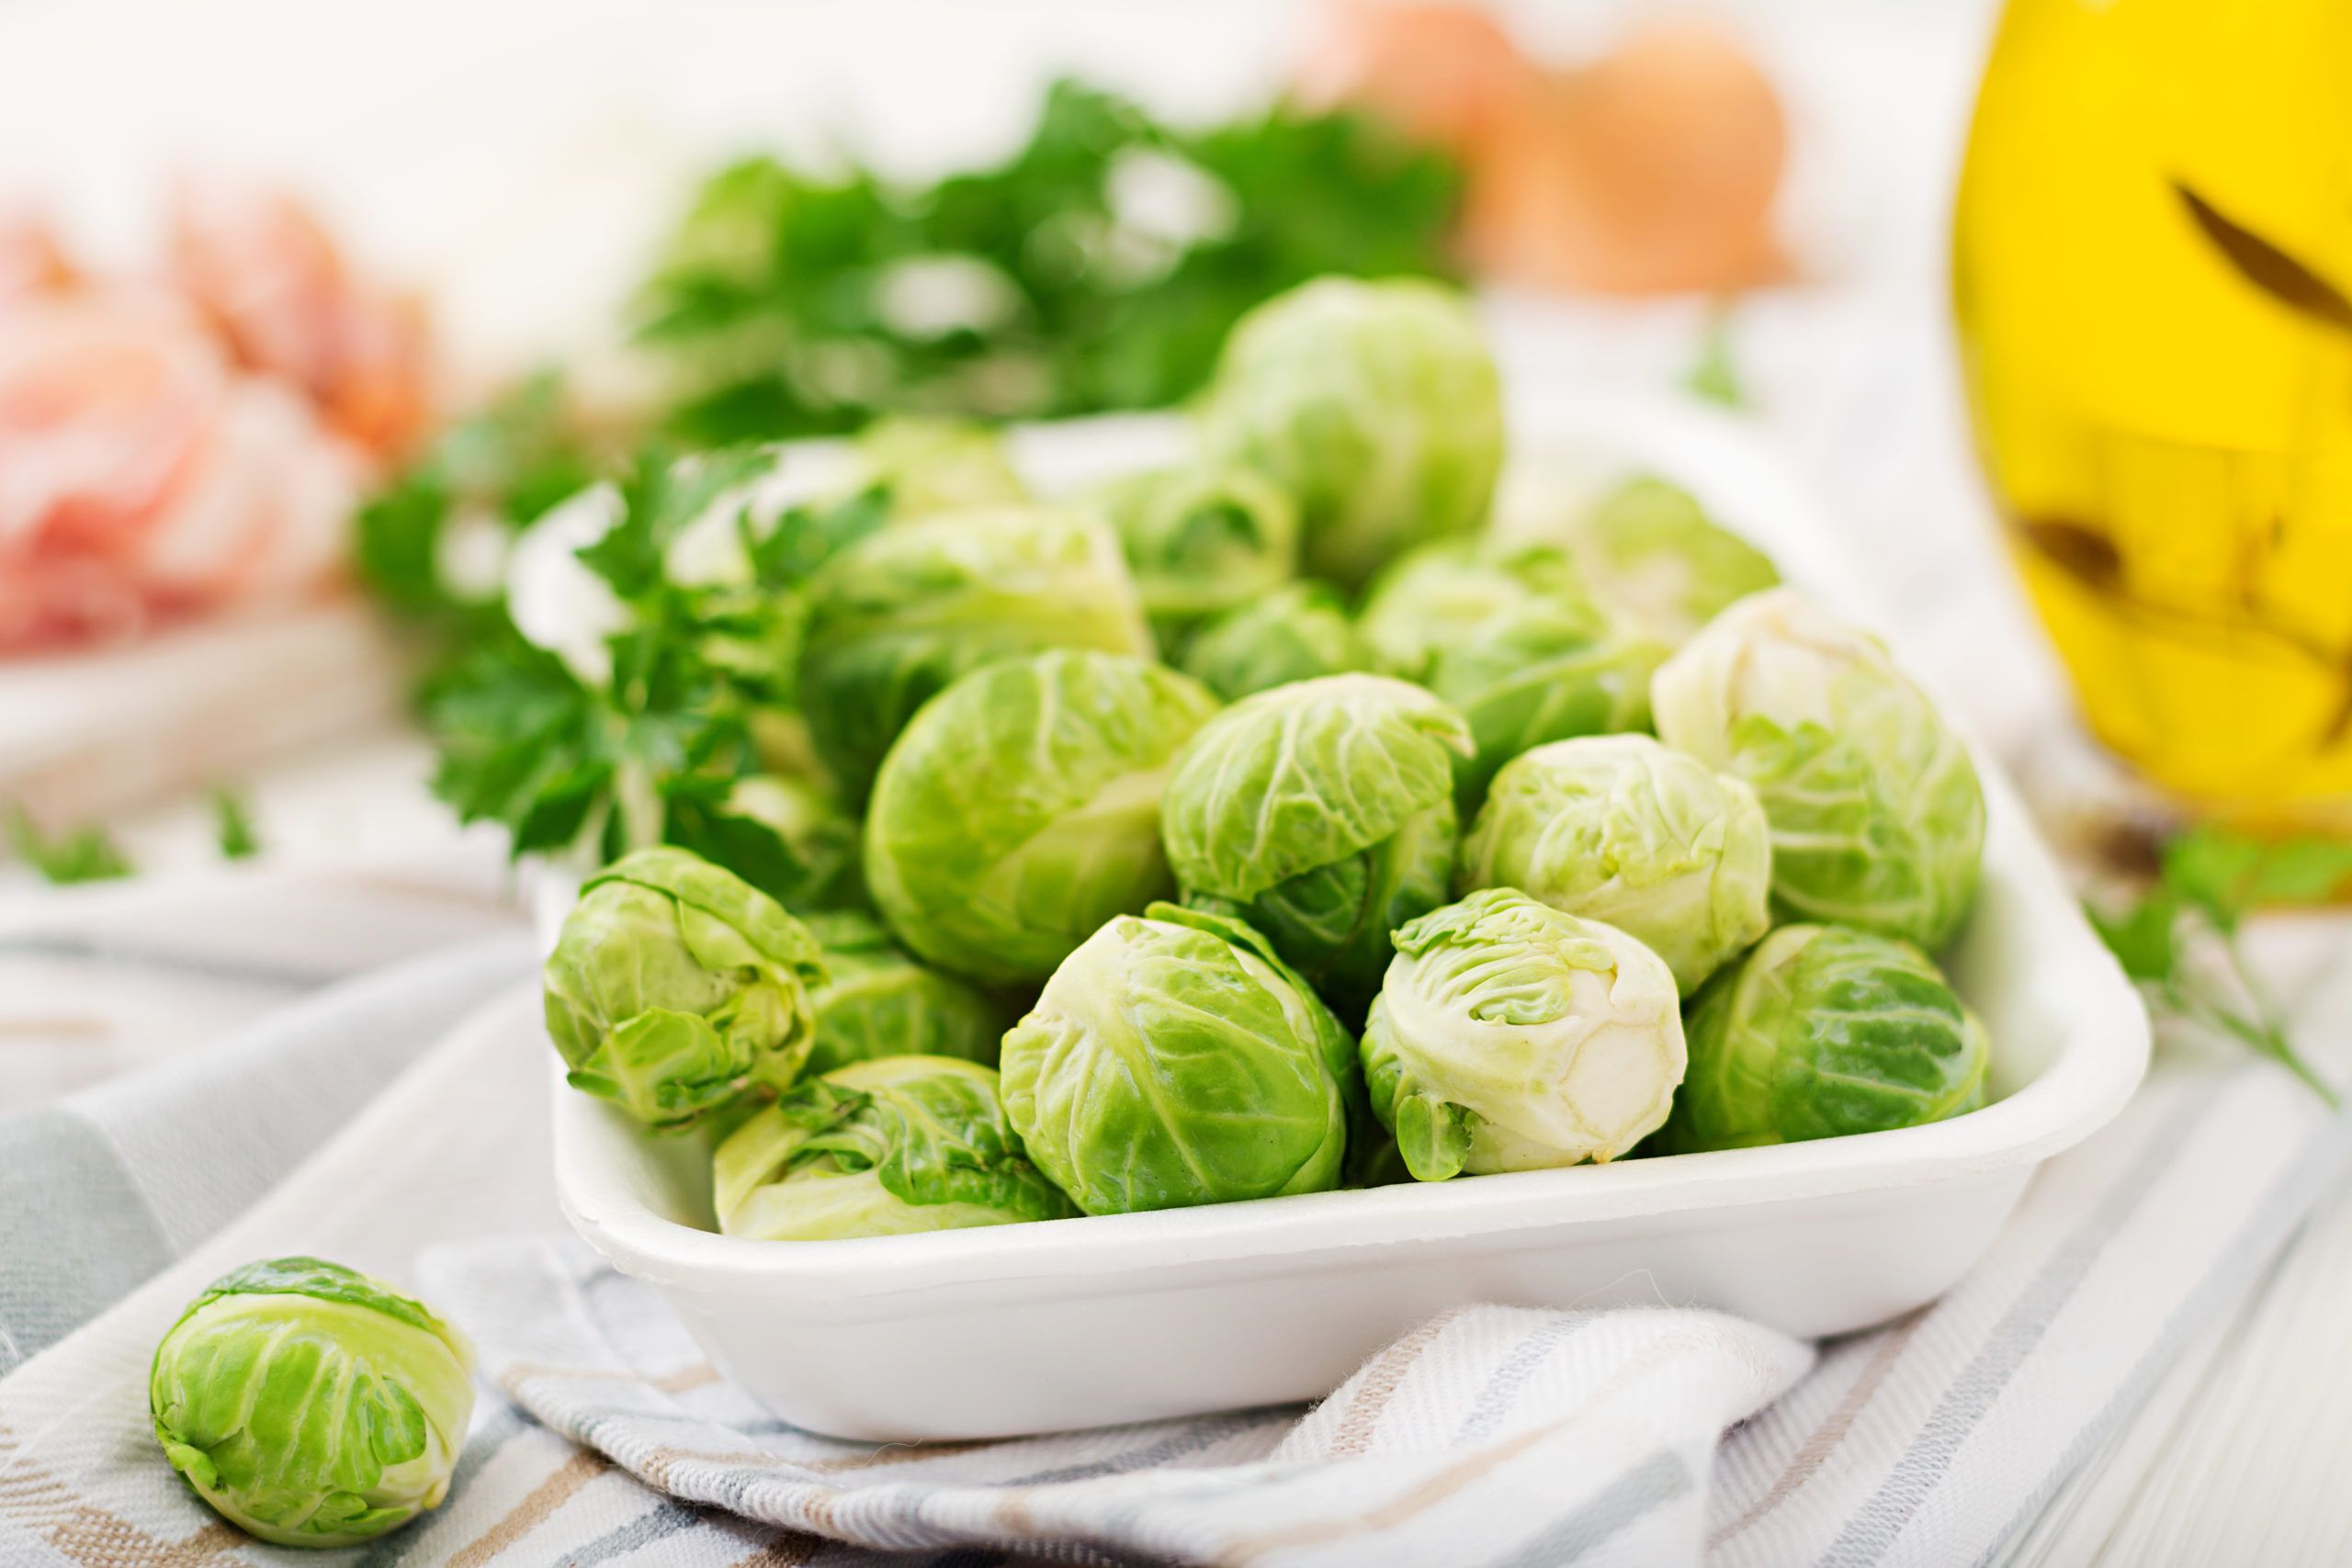 How to Cook Fresh Brussels Sprouts